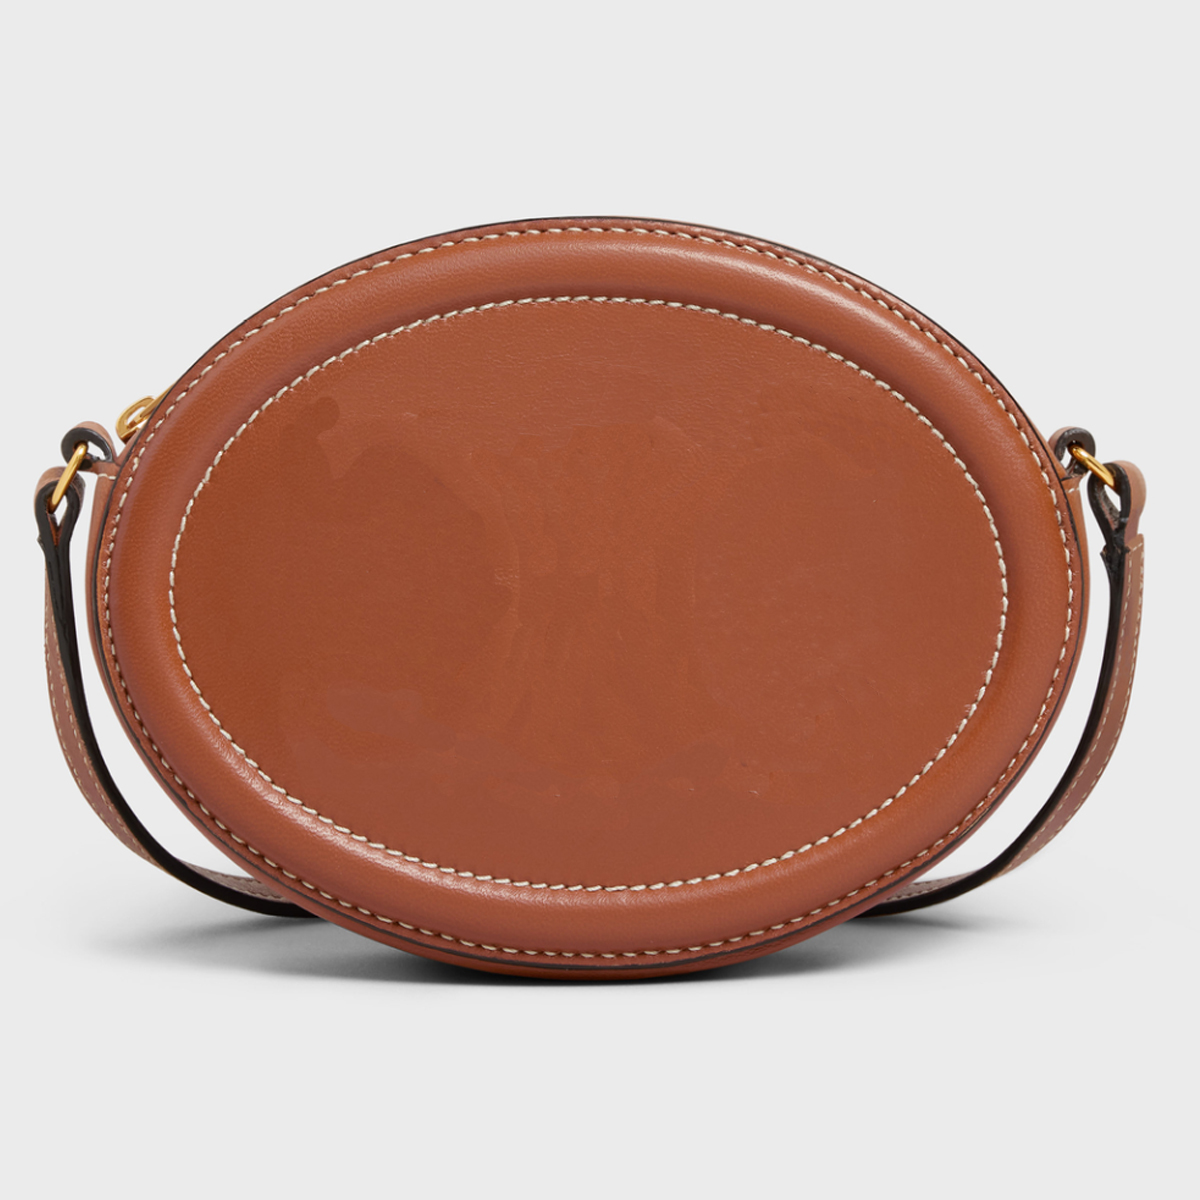 Womes Small Leather Goods Clutches Crossbody Oval Purse In Smooth Cowhide Designer Shoulder Bag Calfskin Lining Gold Metal Hardware Finishing Coin Purses 10I703 от DHgate WW